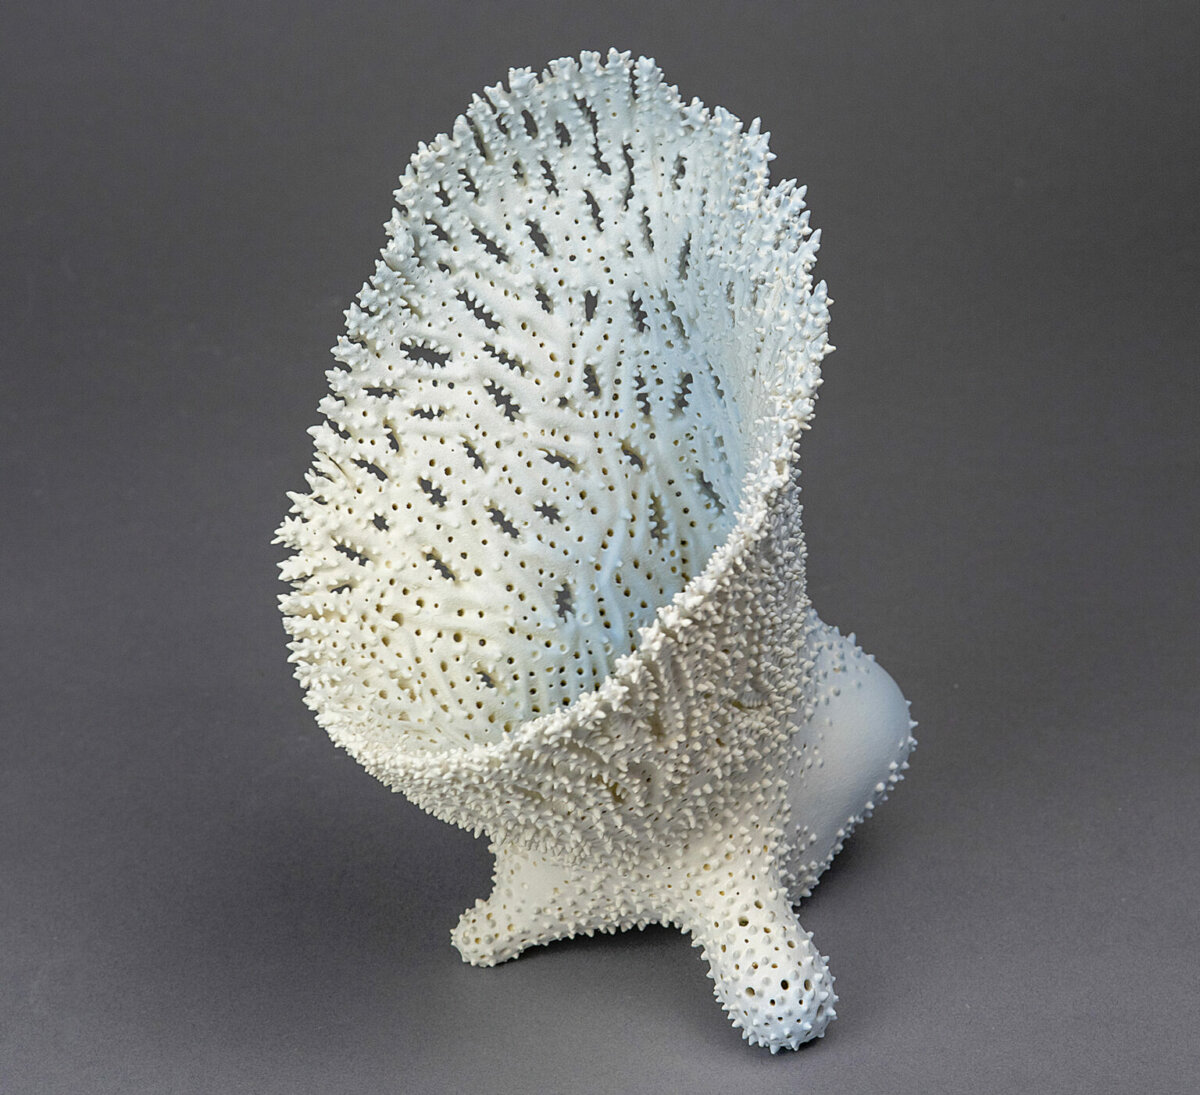 Marine Abstracts: coral-like ceramic sculptures by Marguerita